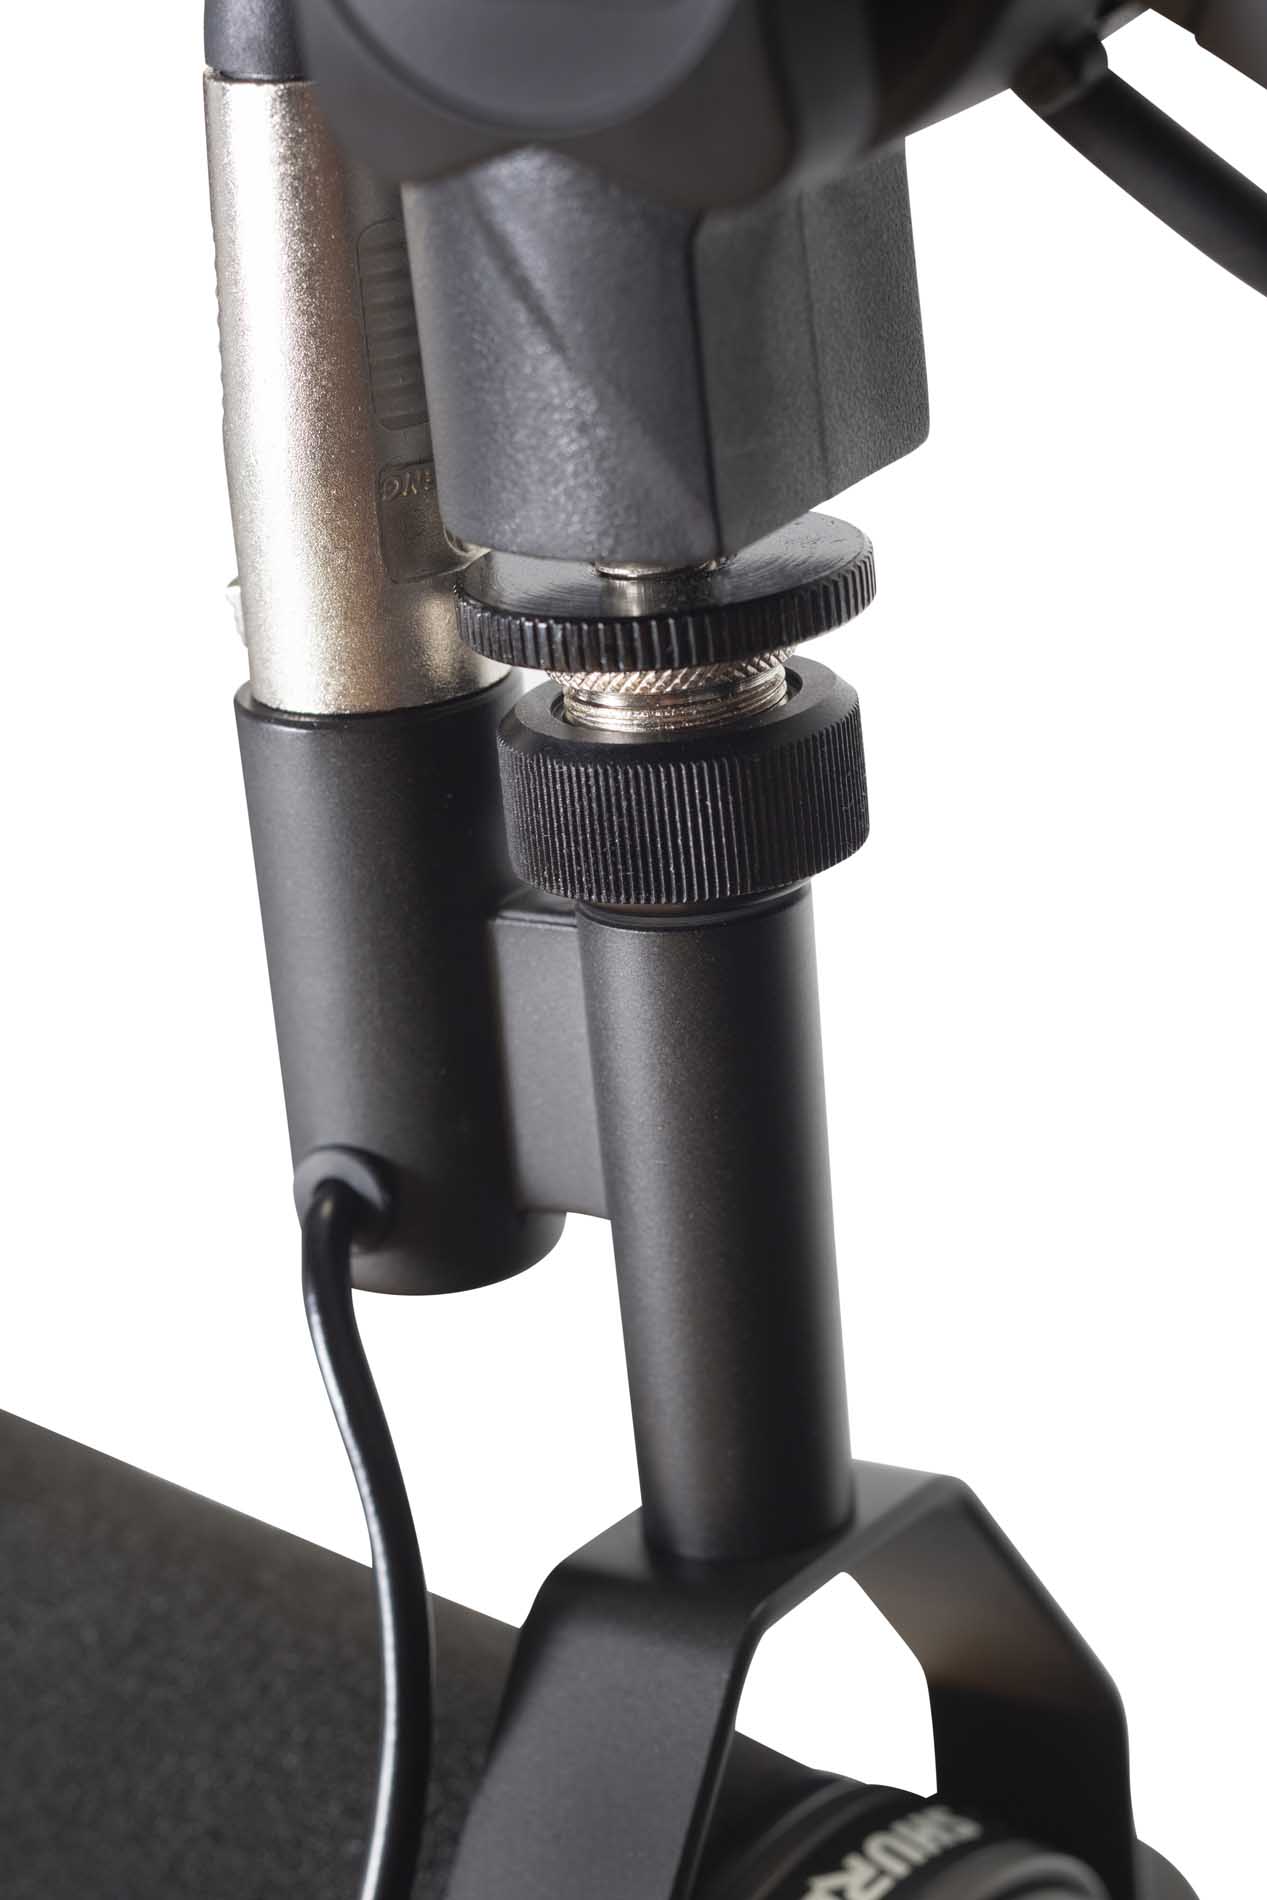 Gator Frameworks GFWMICBCBM3000 Deluxe Desktop Mic Boom Stand For Podcasts and Recording - Hollywood DJ